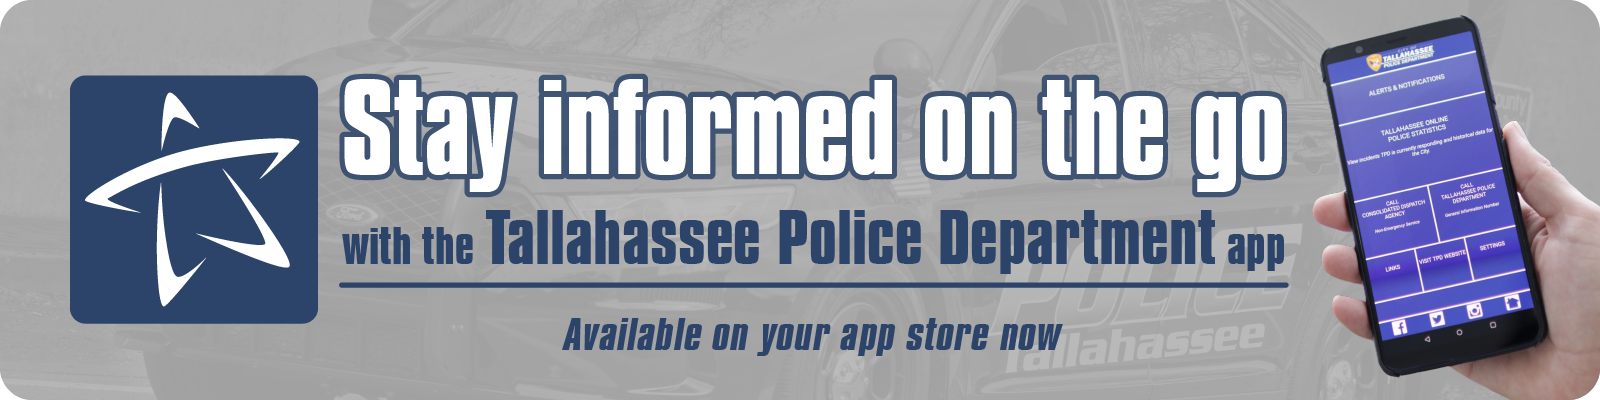 Stay informed on the go - with the TPD mobile app available on your app store now